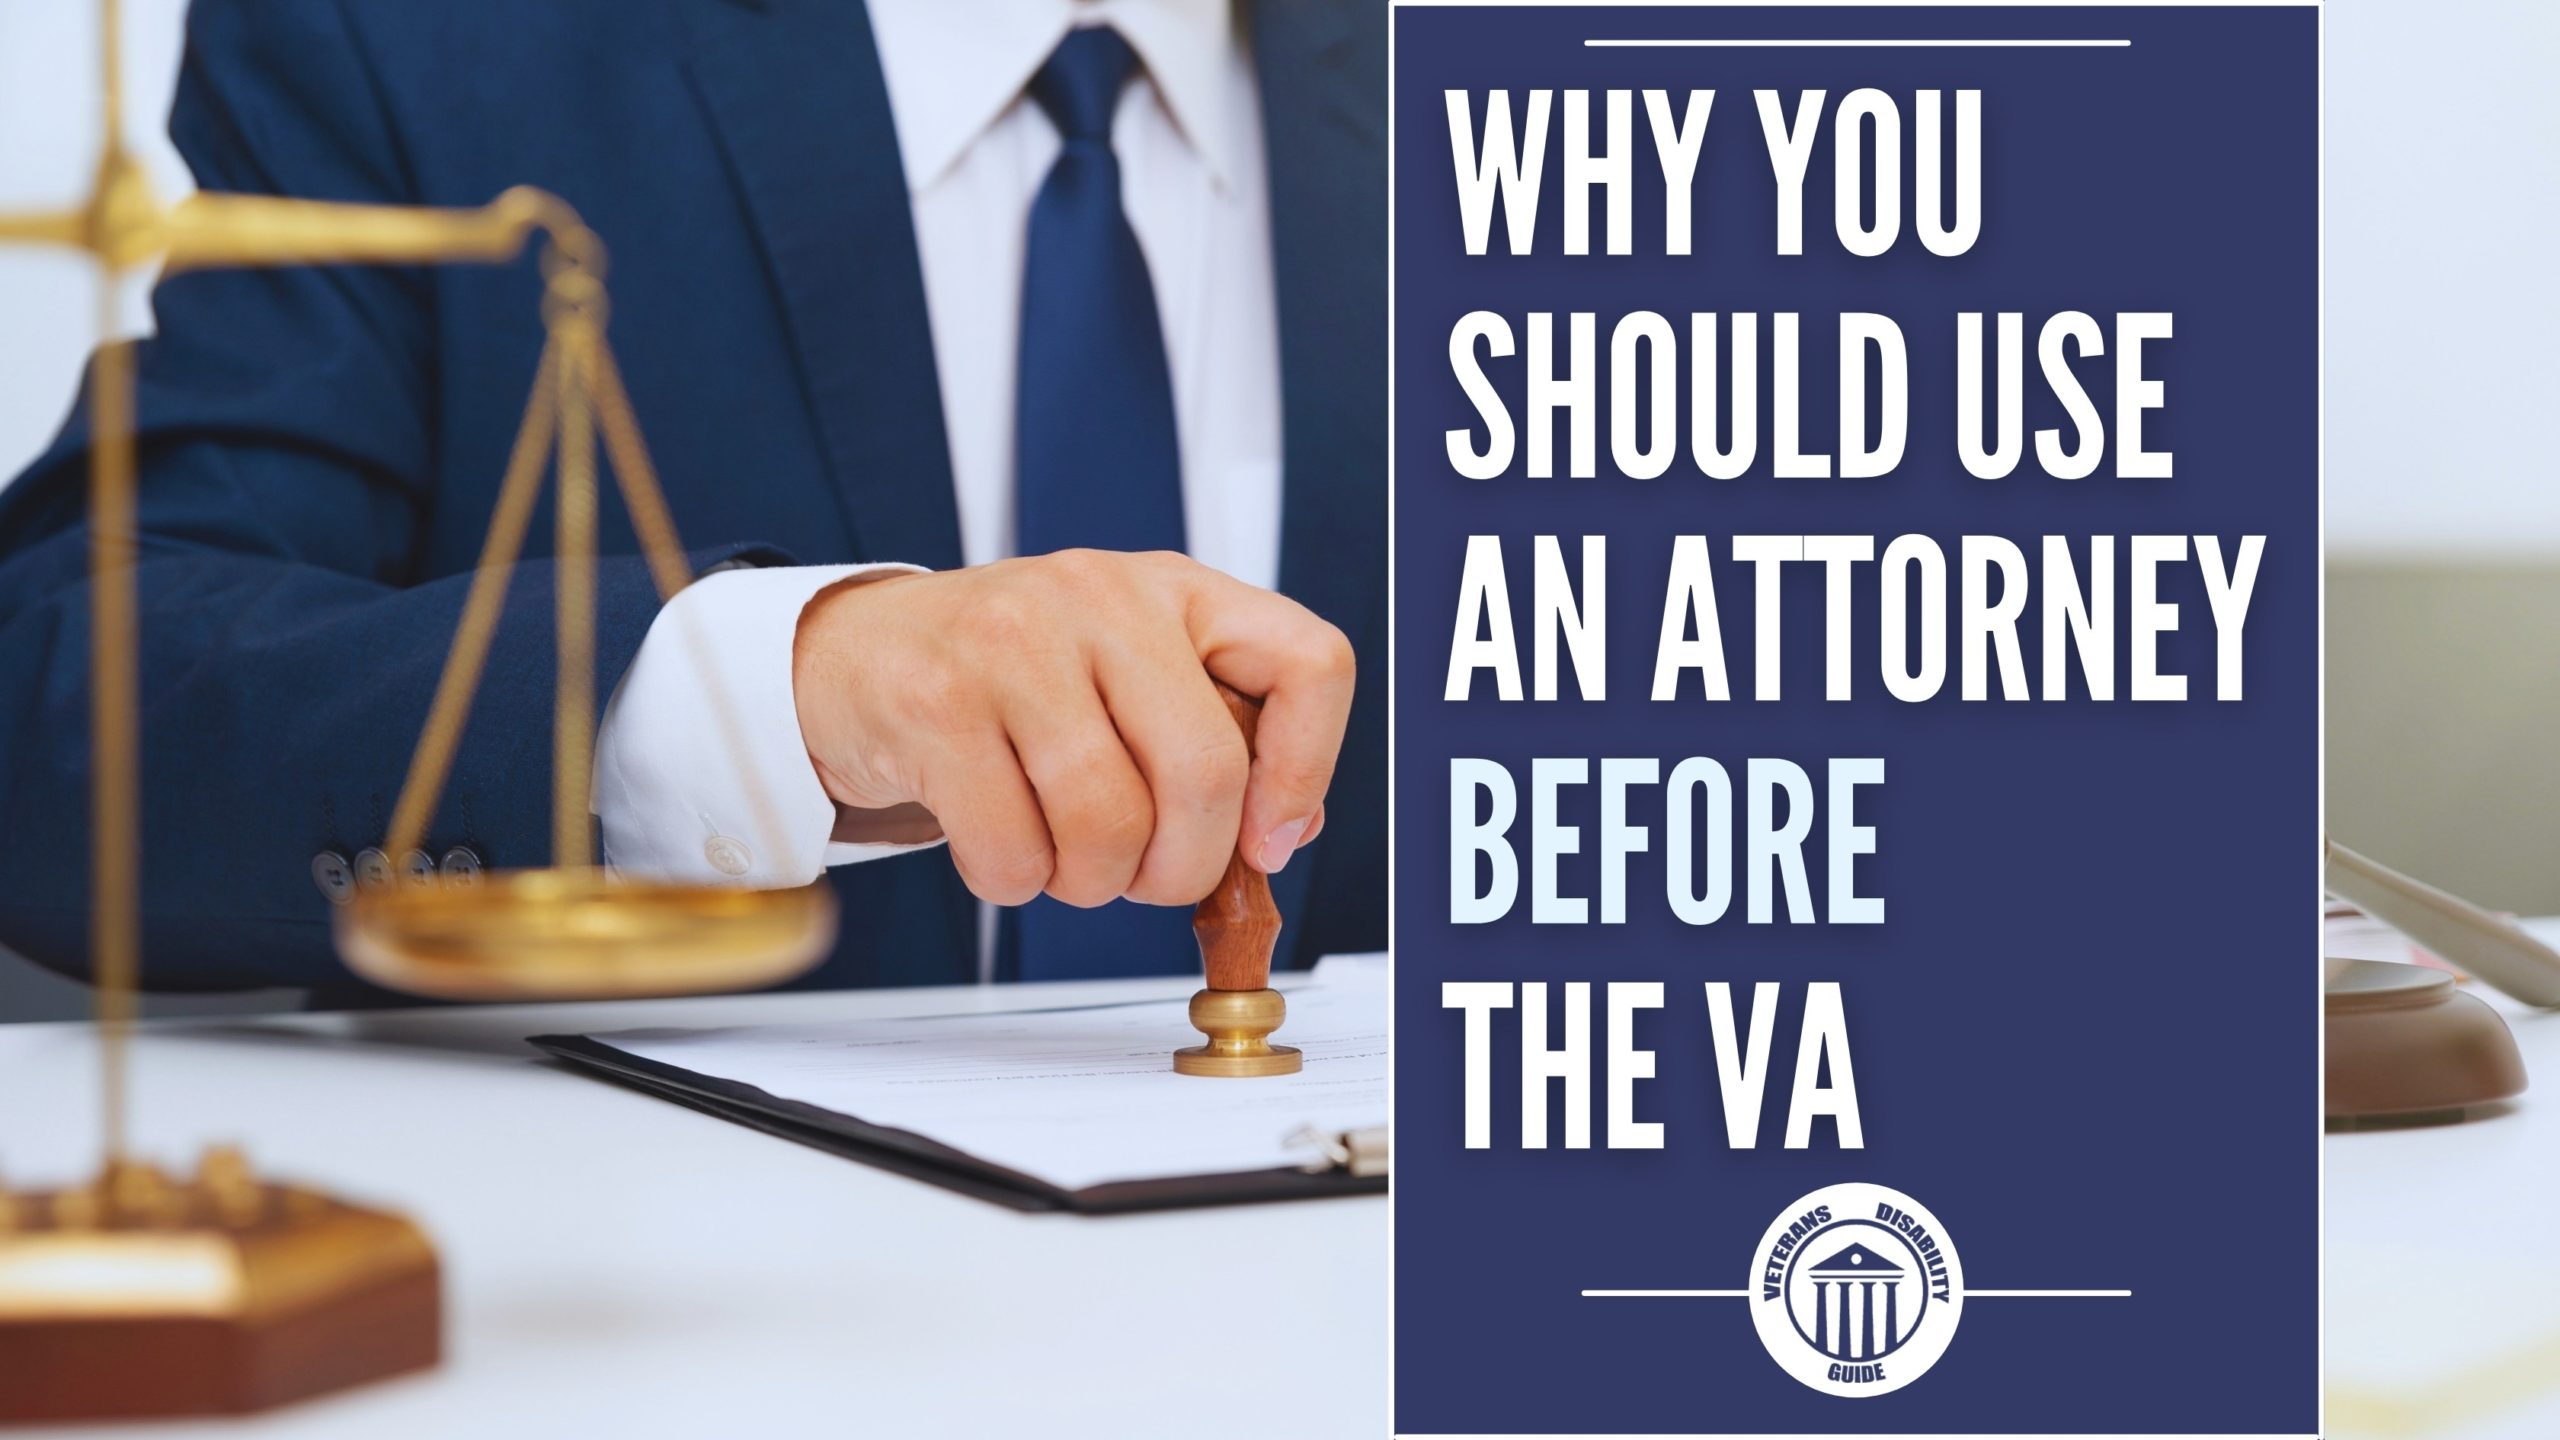 Why You Should Use An Attorney Before The VA blog header image